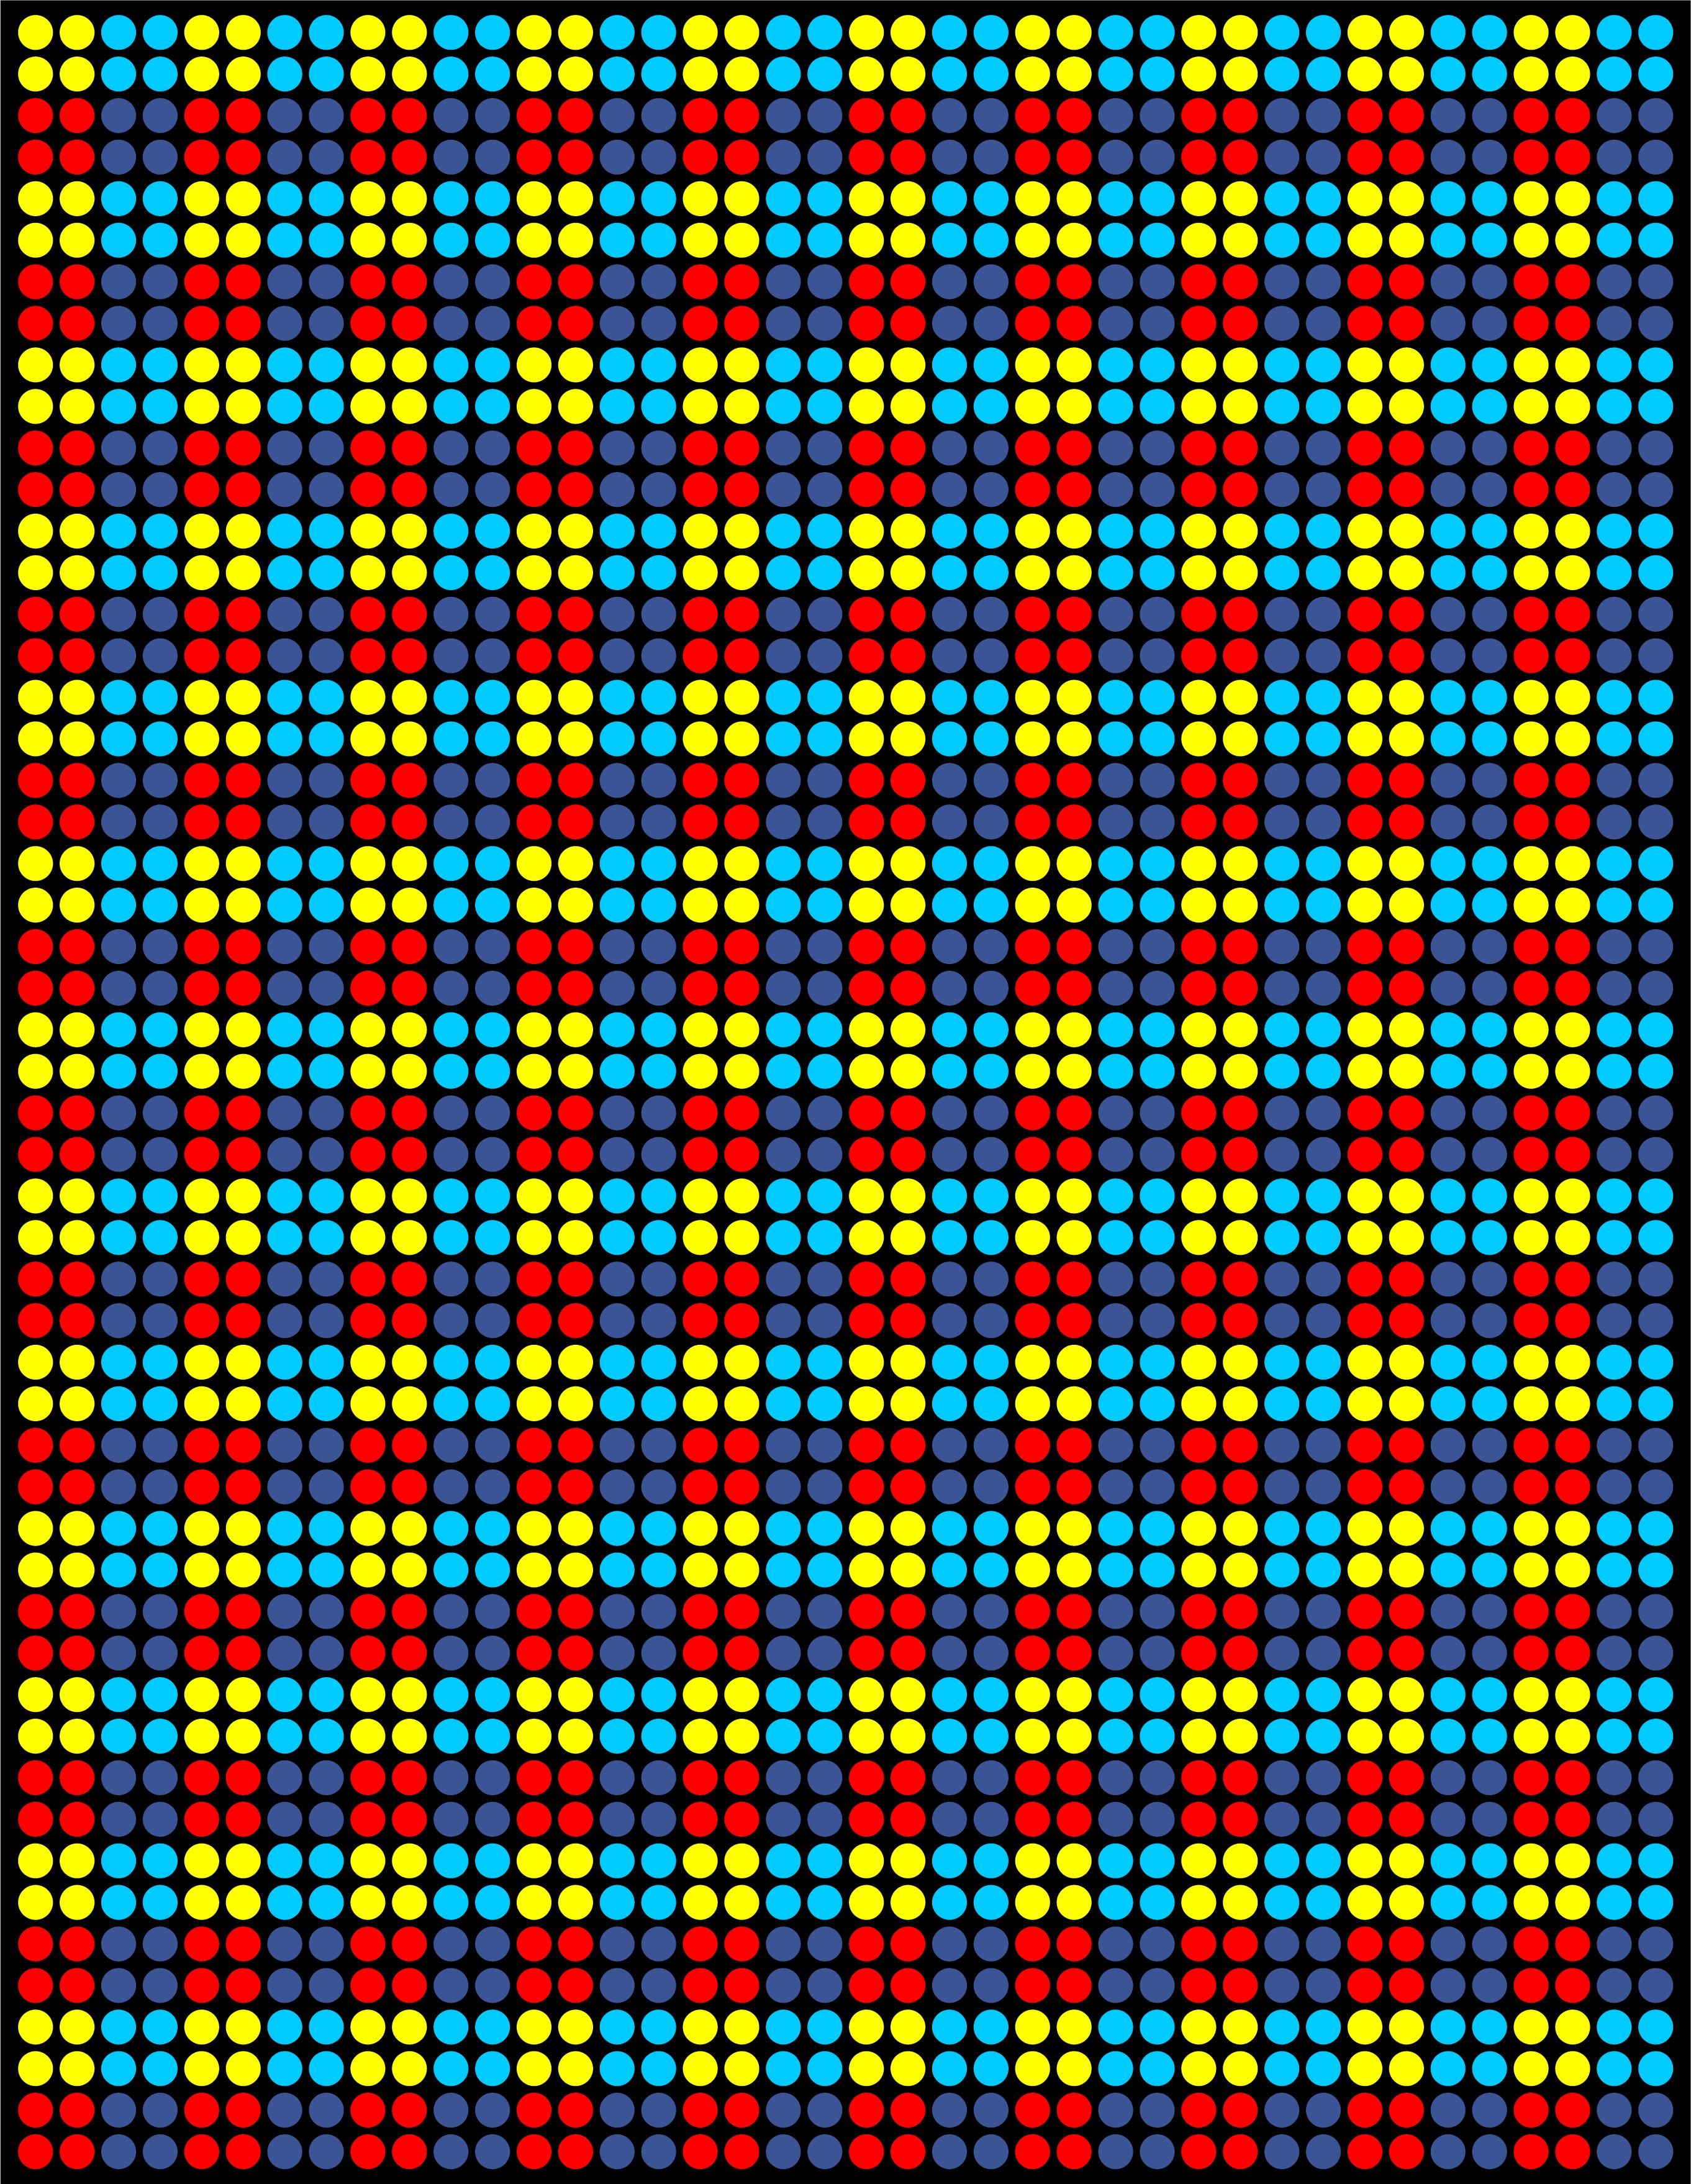 Series: Abstract
Oil Enamel Paint on Canvas

I consider each colored dot to be like a person. You and me and everyone. Together we all make up that image shown. You will notice that in my work all the dots are spread out evenly in a grid. The grid